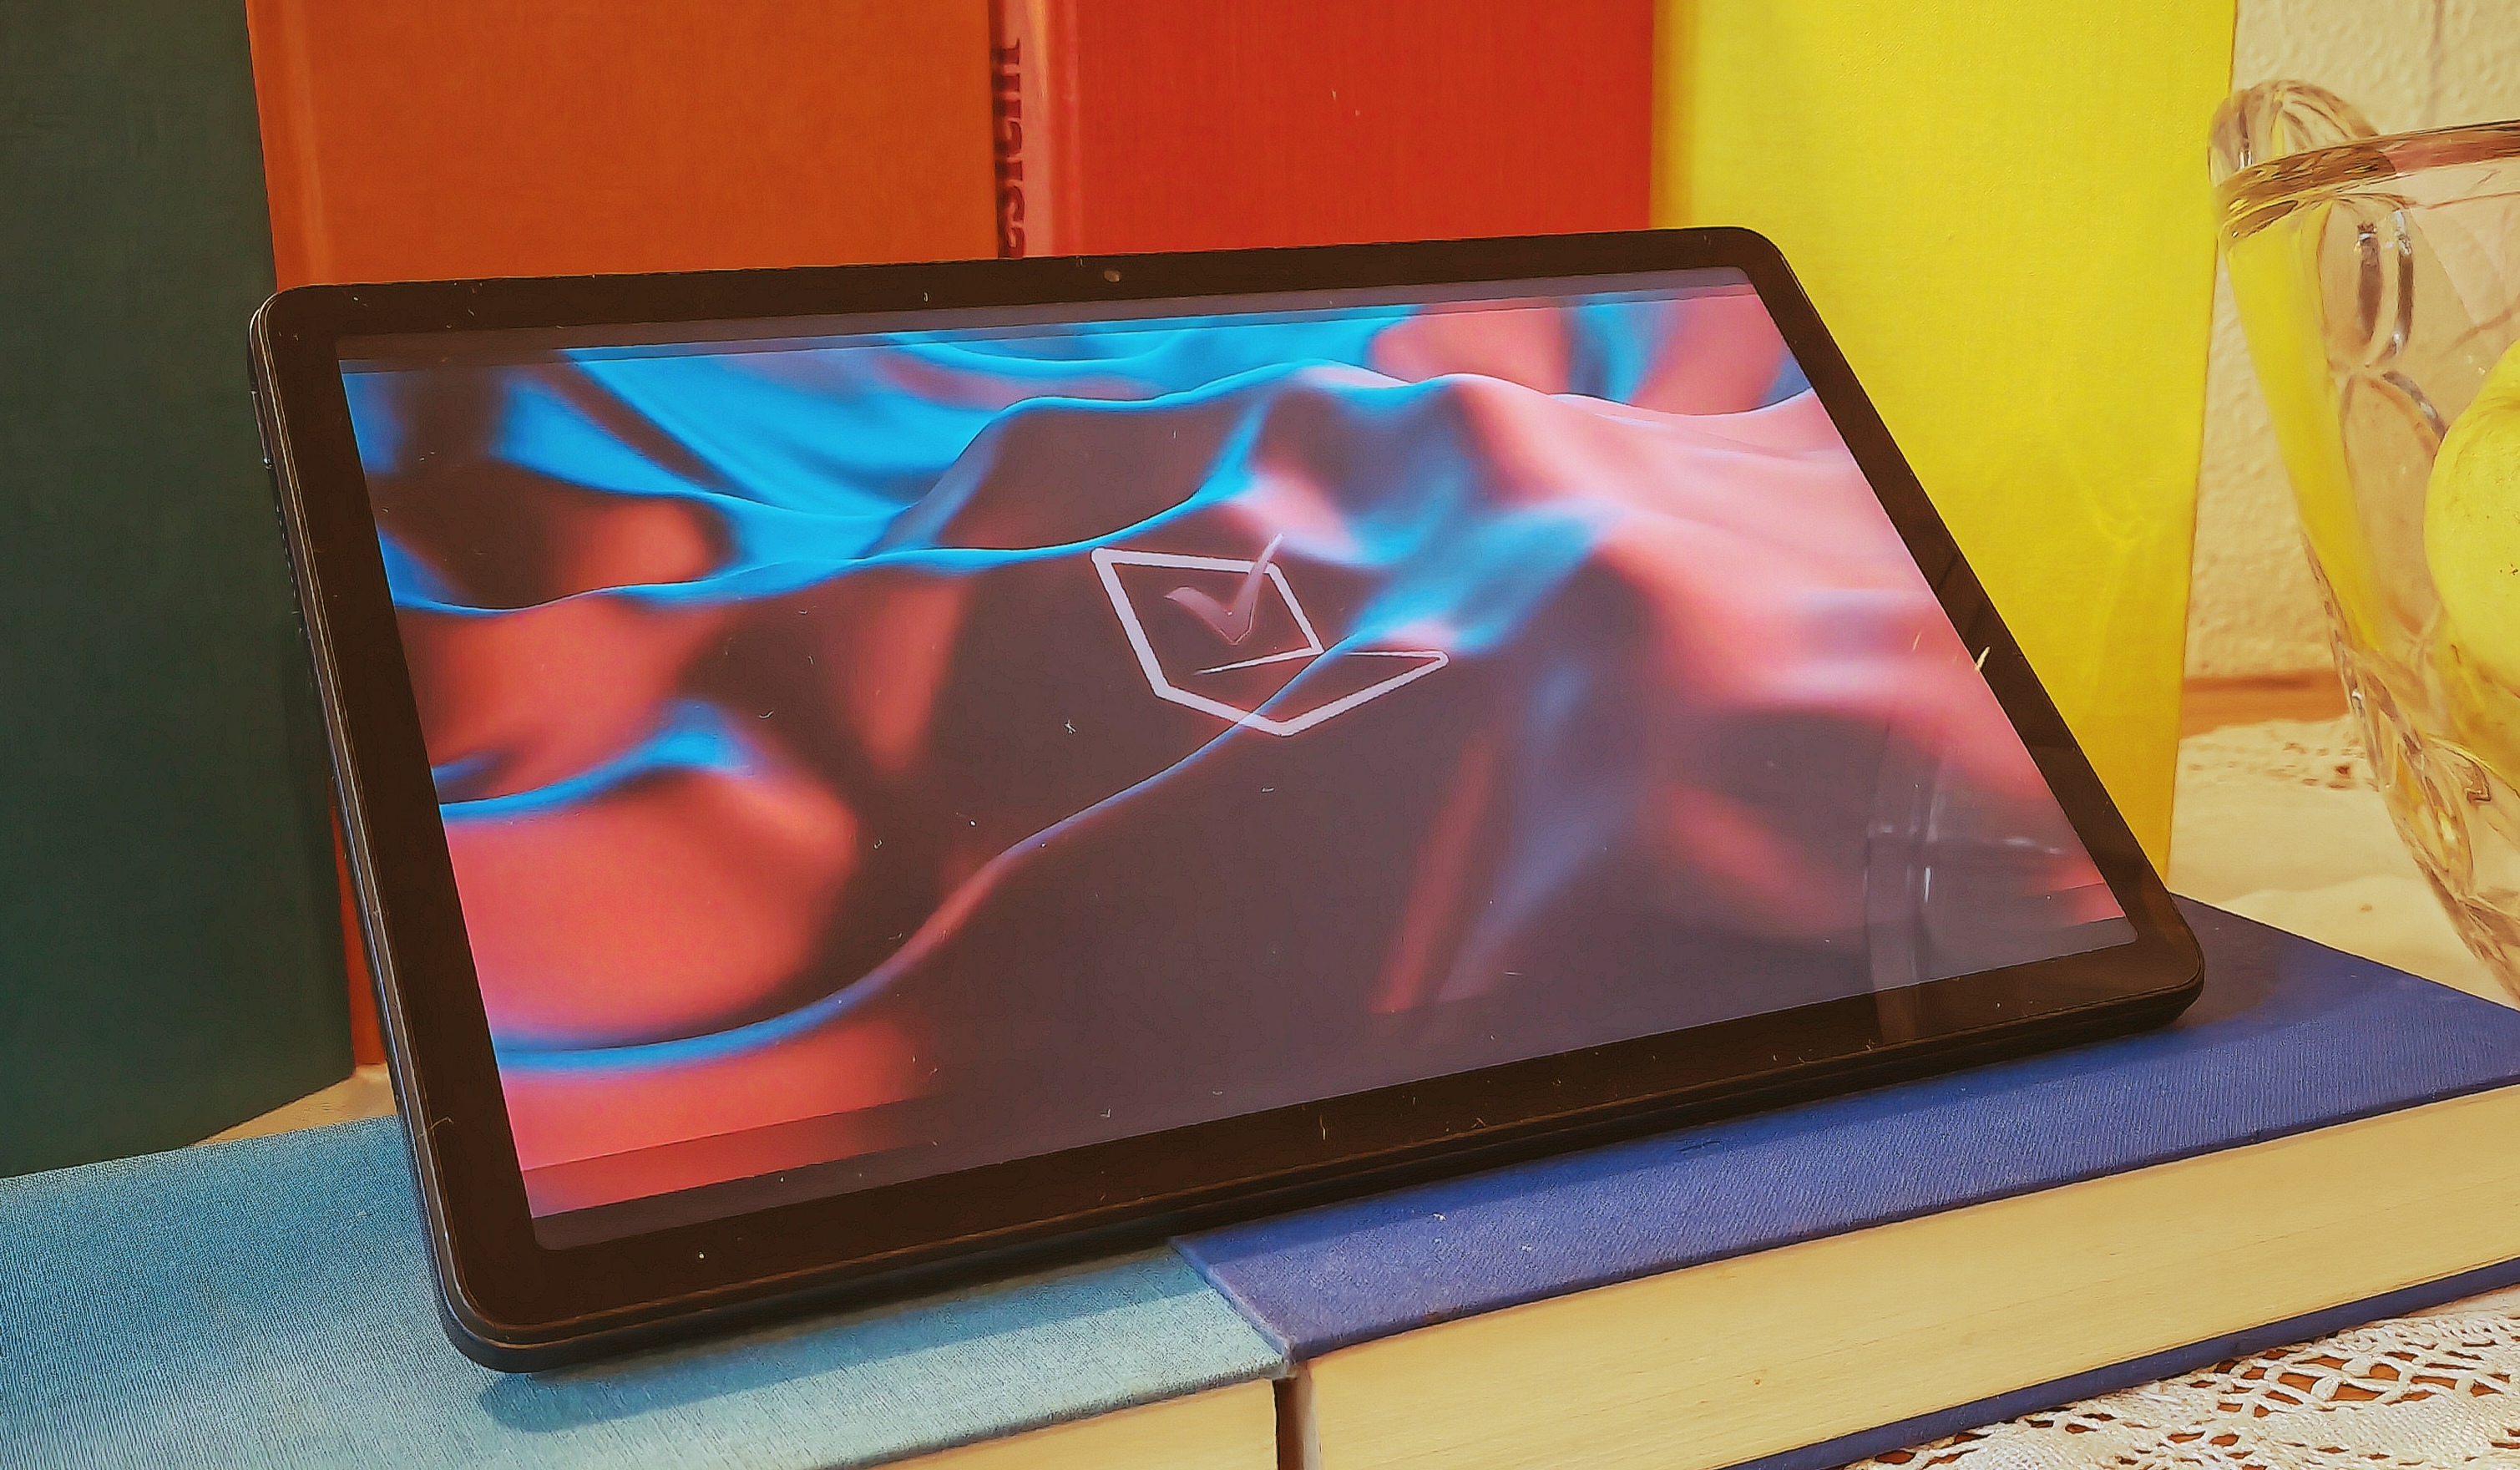 Teclast P26T - The New Benchmark For Cheap Entry Level Tablets